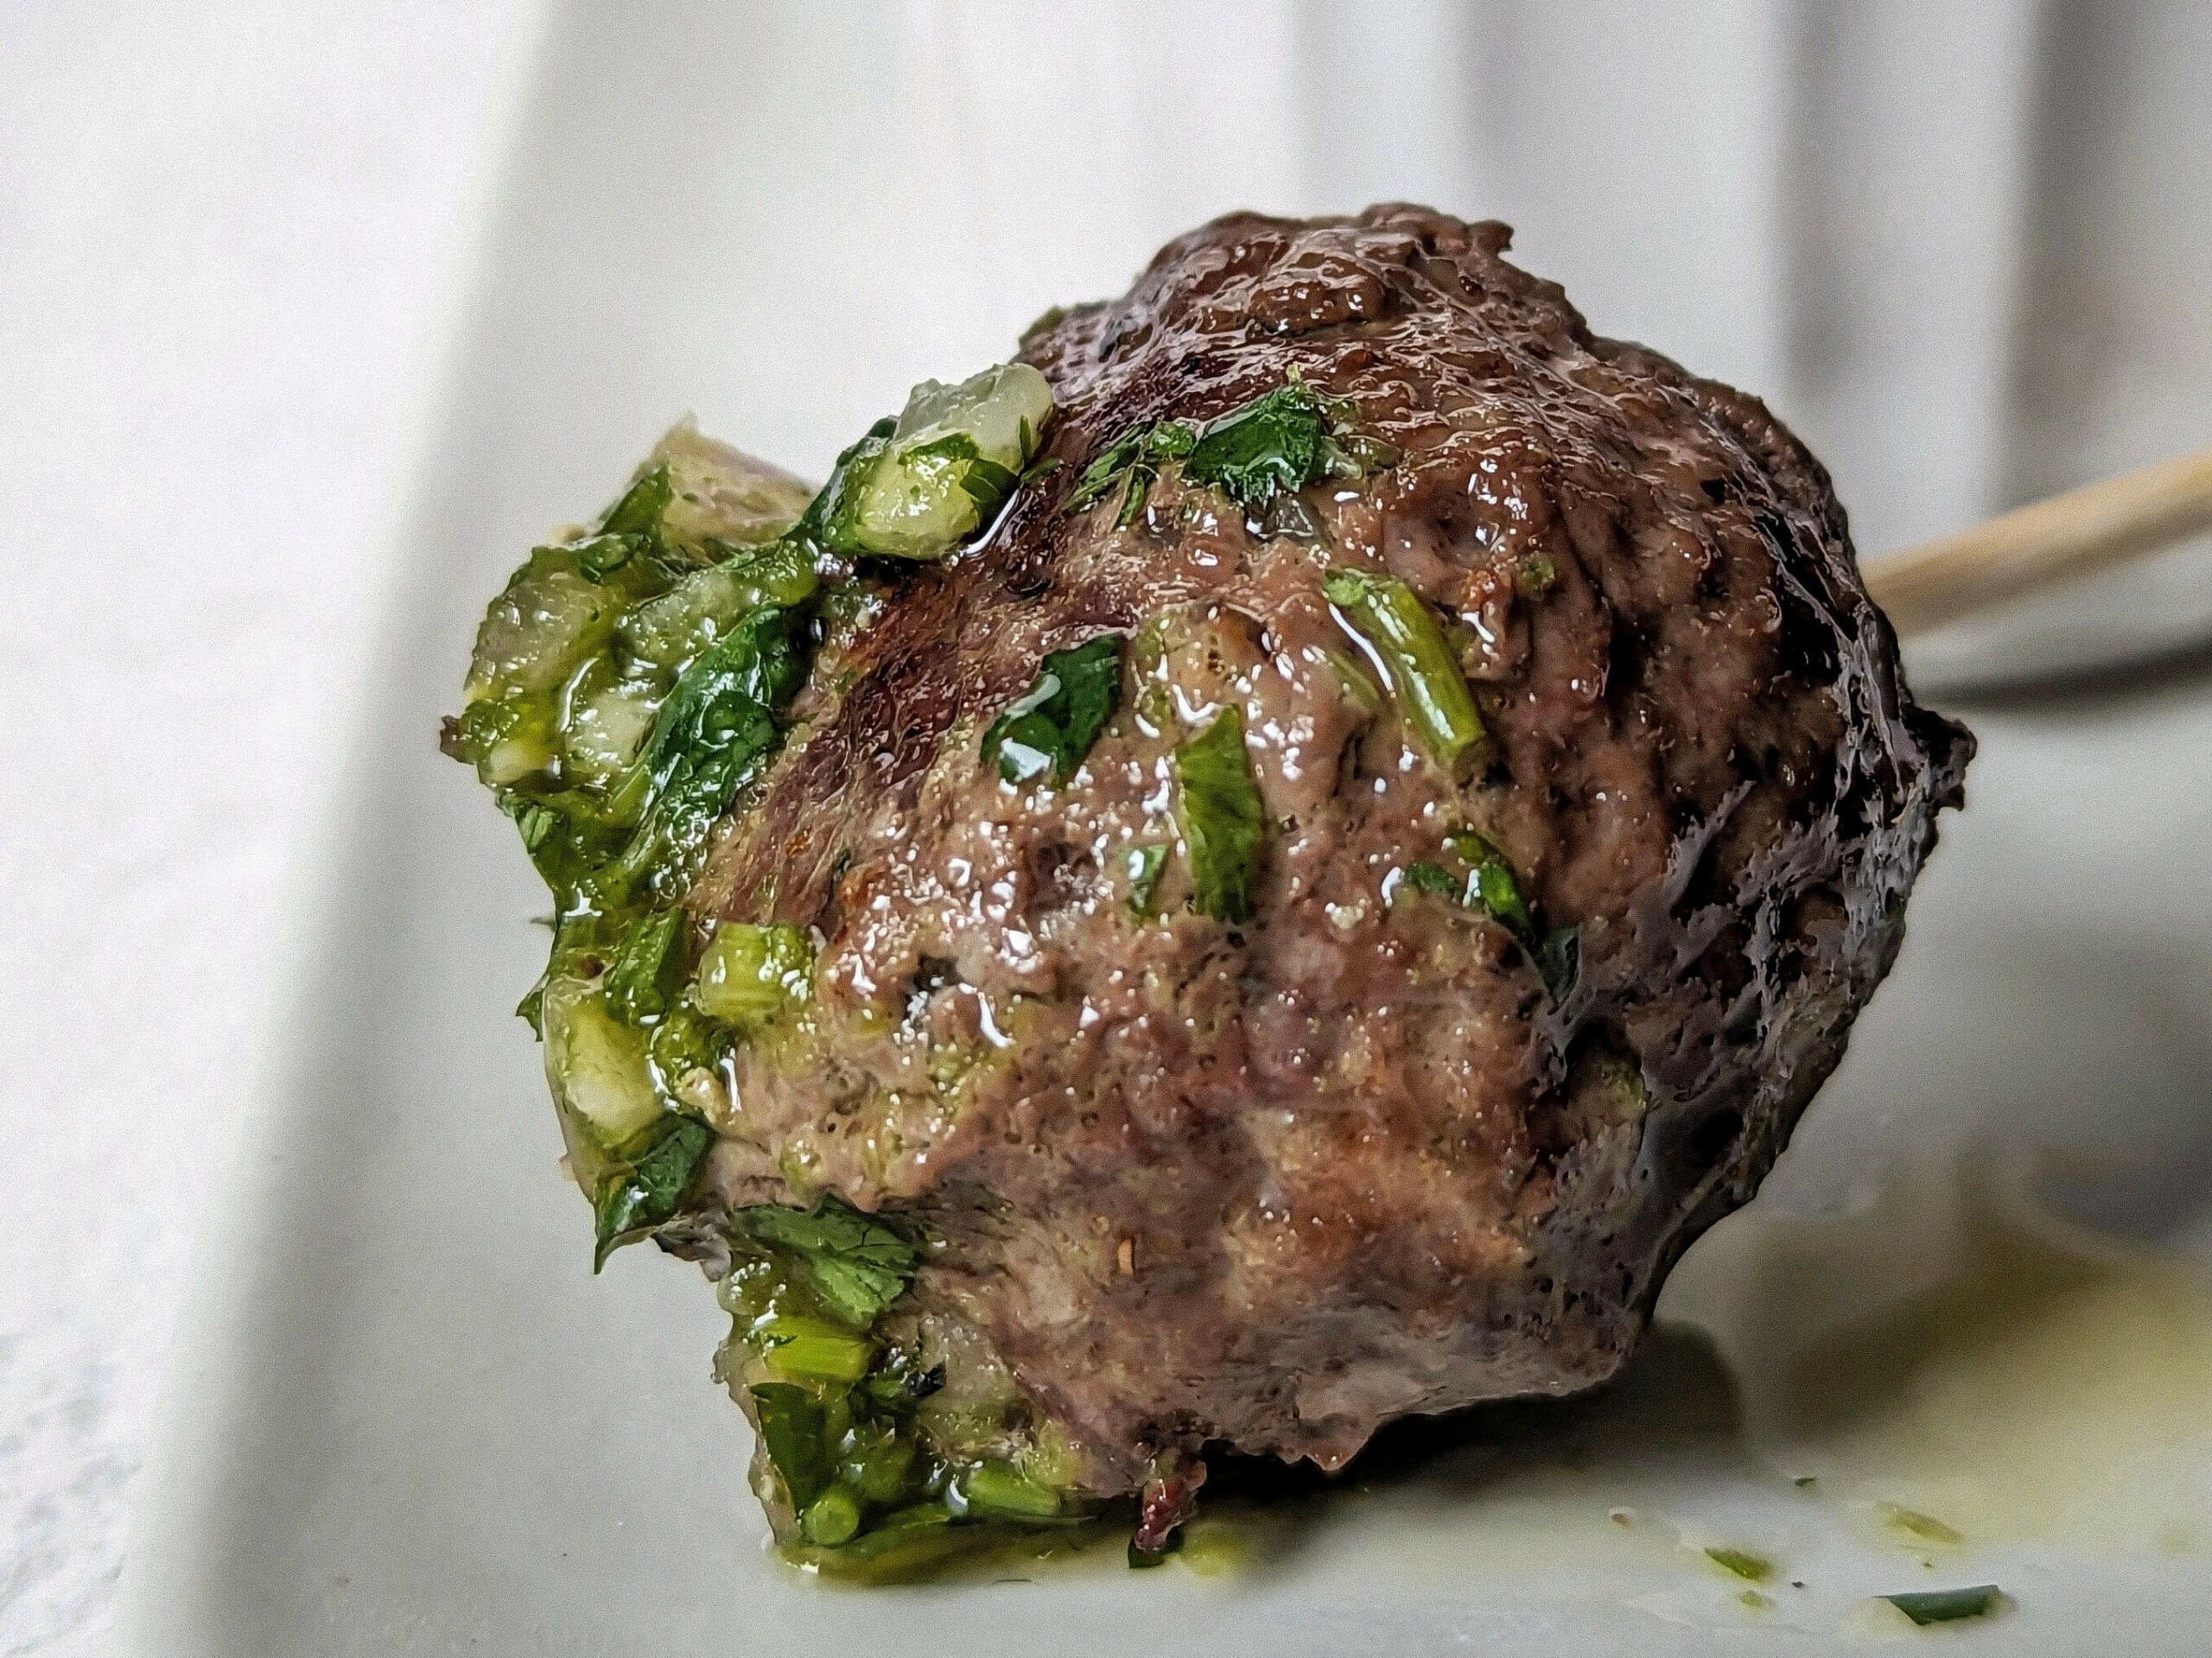 A close up of a meatball dipped in chimichuri.